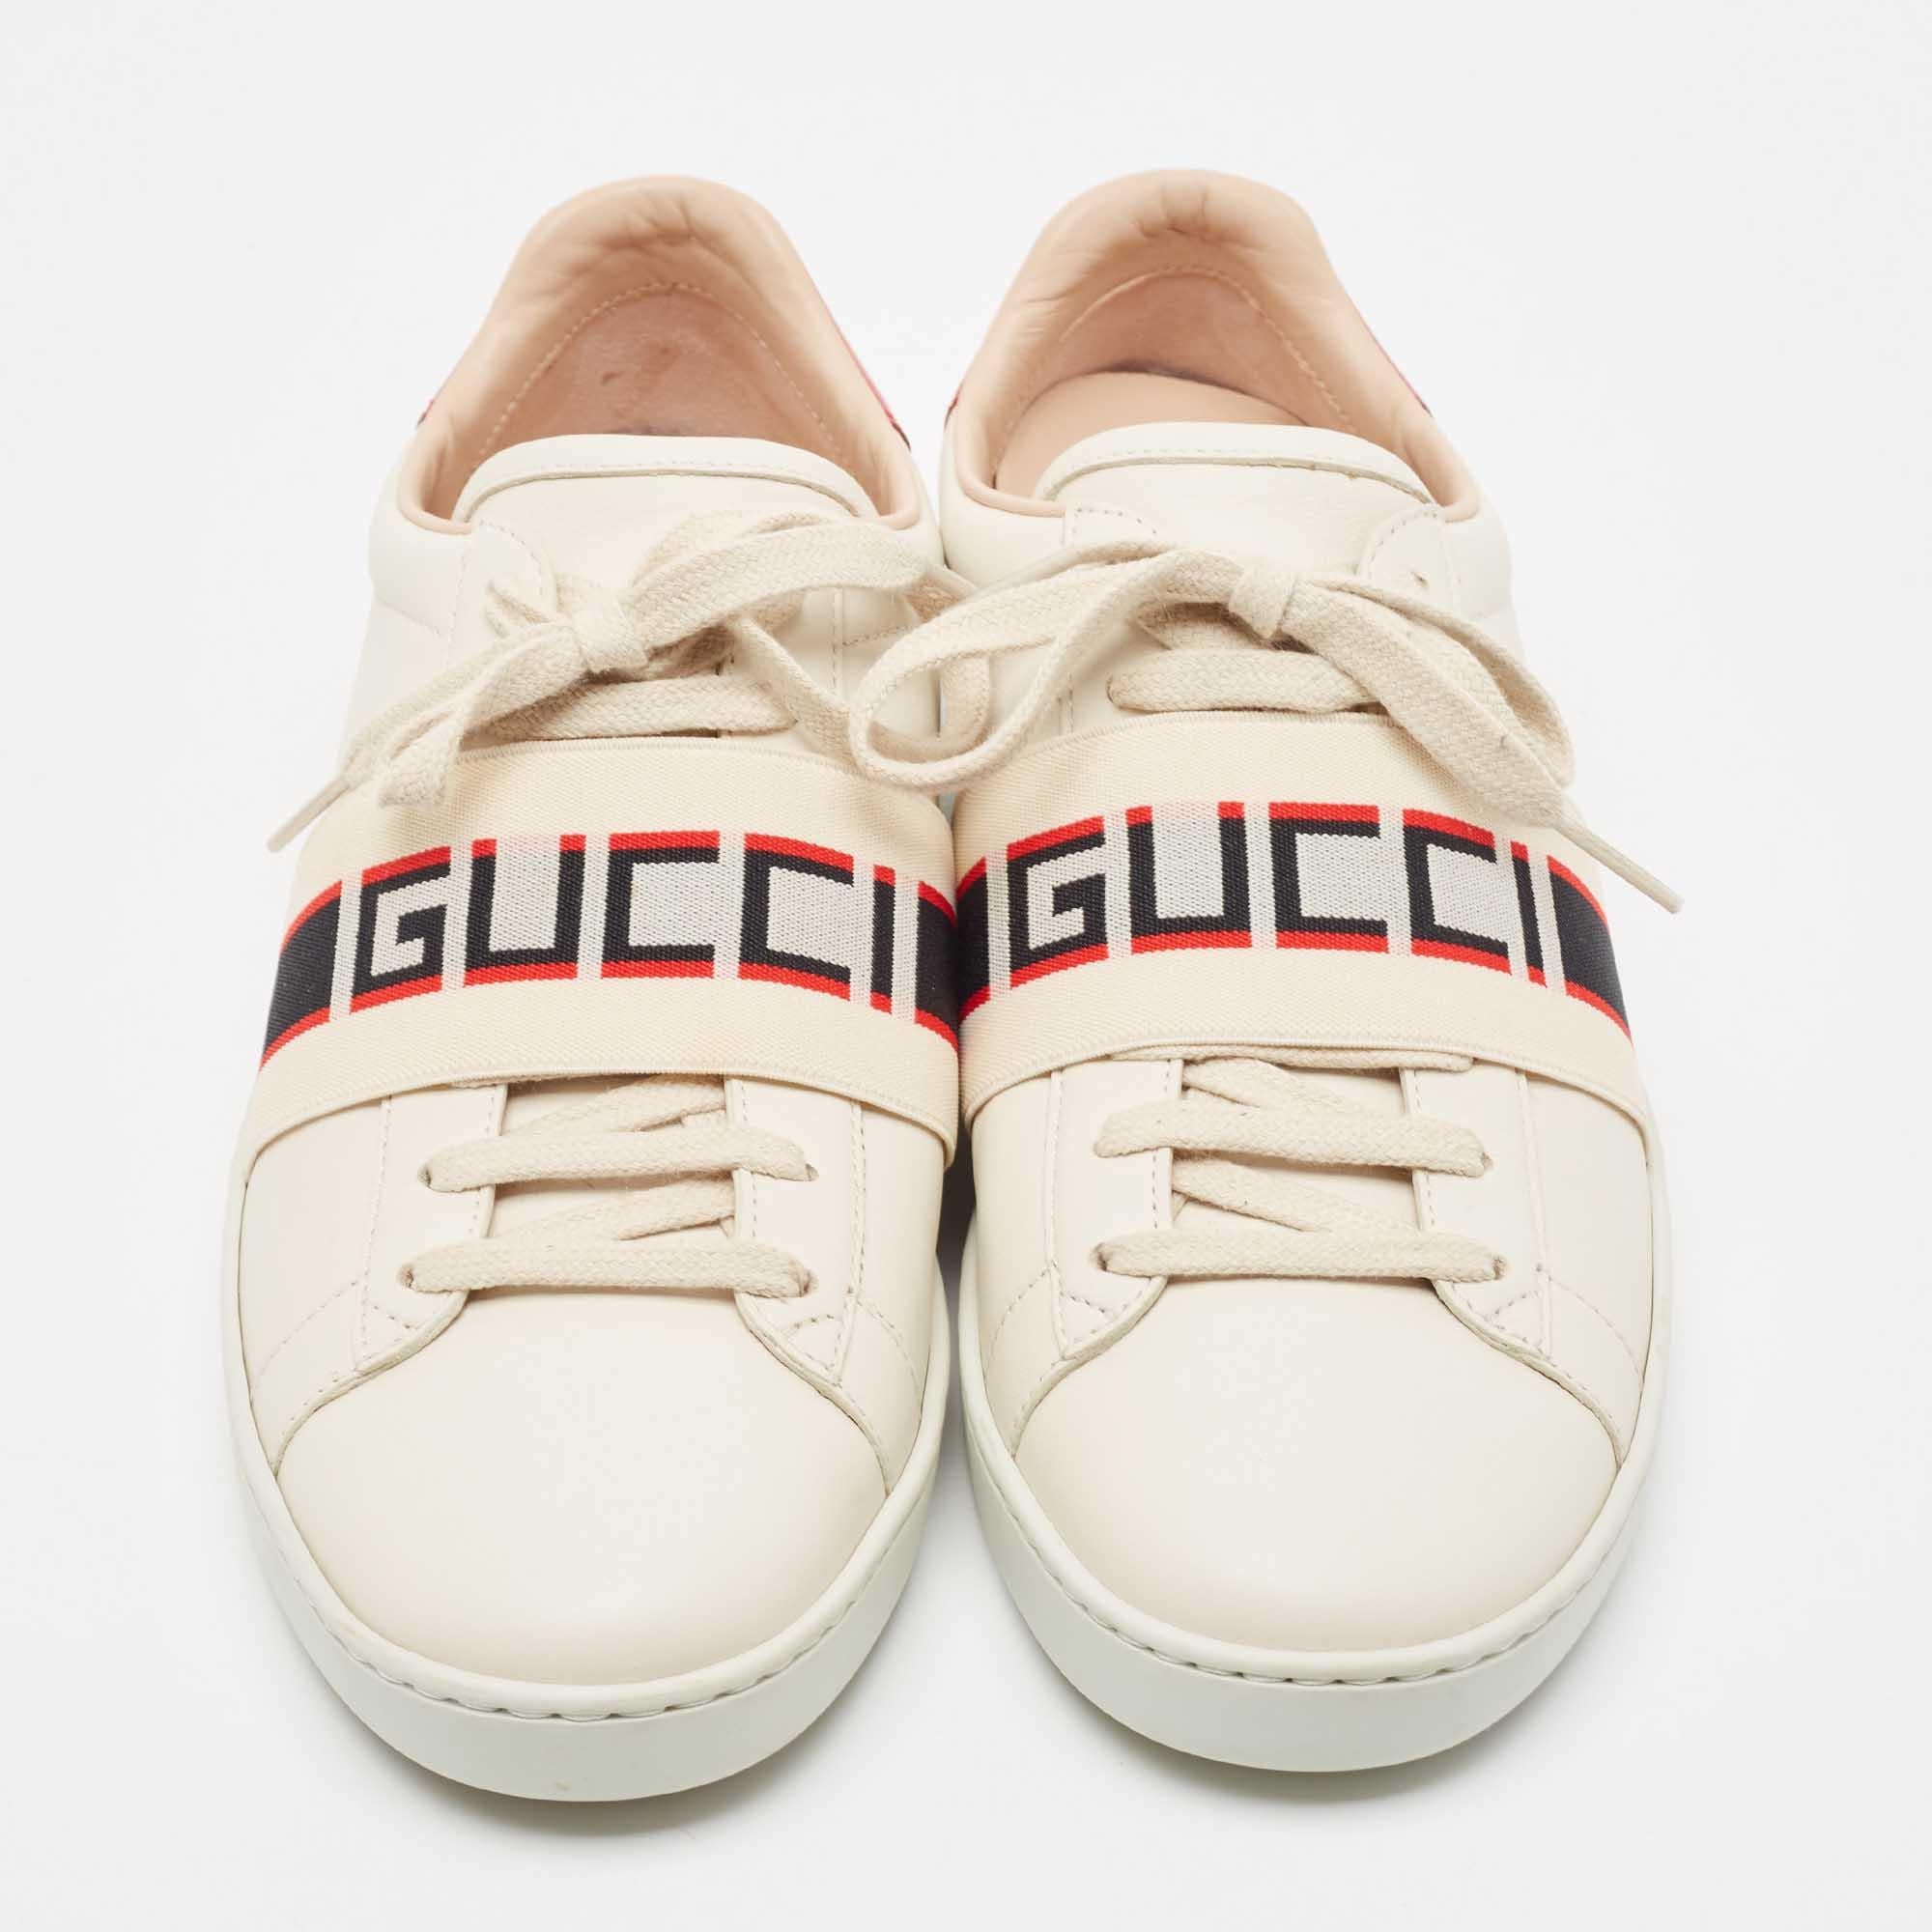 Give your outfit a luxe update with this pair of Gucci cream sneakers. The shoes are sewn perfectly to help you make a statement in them for a long time.

Includes: Original Dustbag, Original Box, Info Booklet

